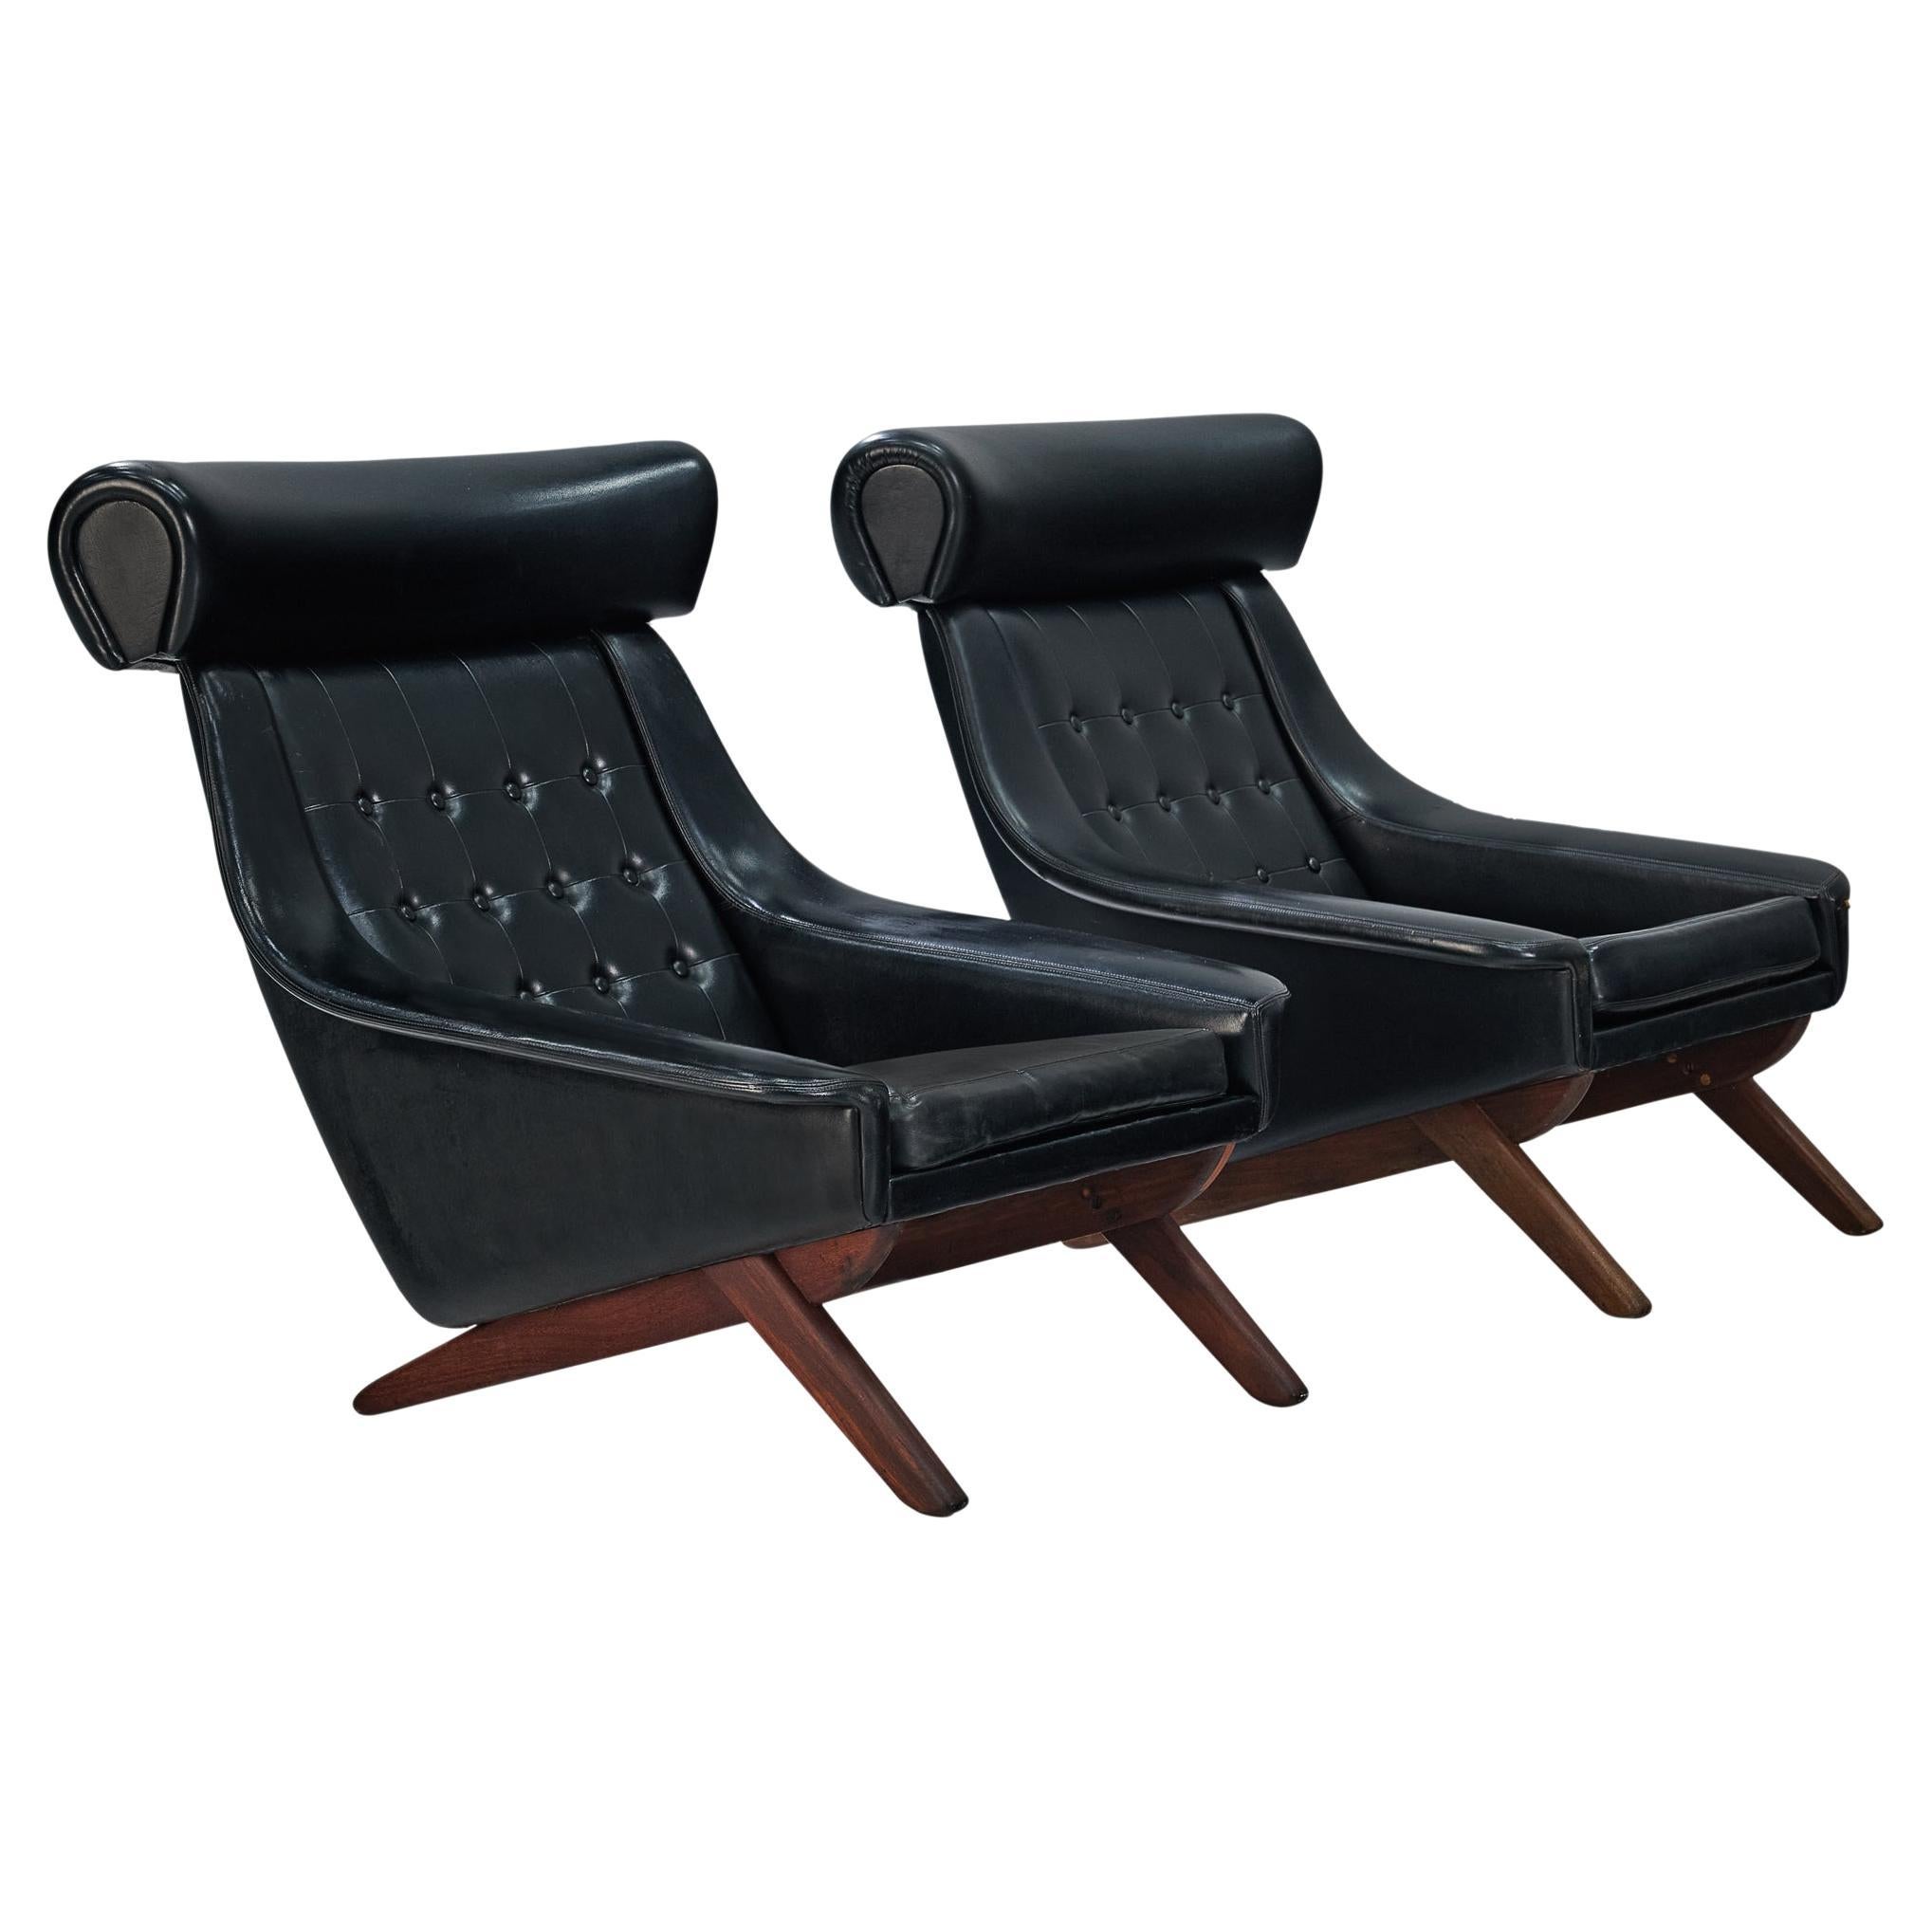  Illum Wikkelsø Pair of Easy Chairs in Black Upholstery and Teak  For Sale